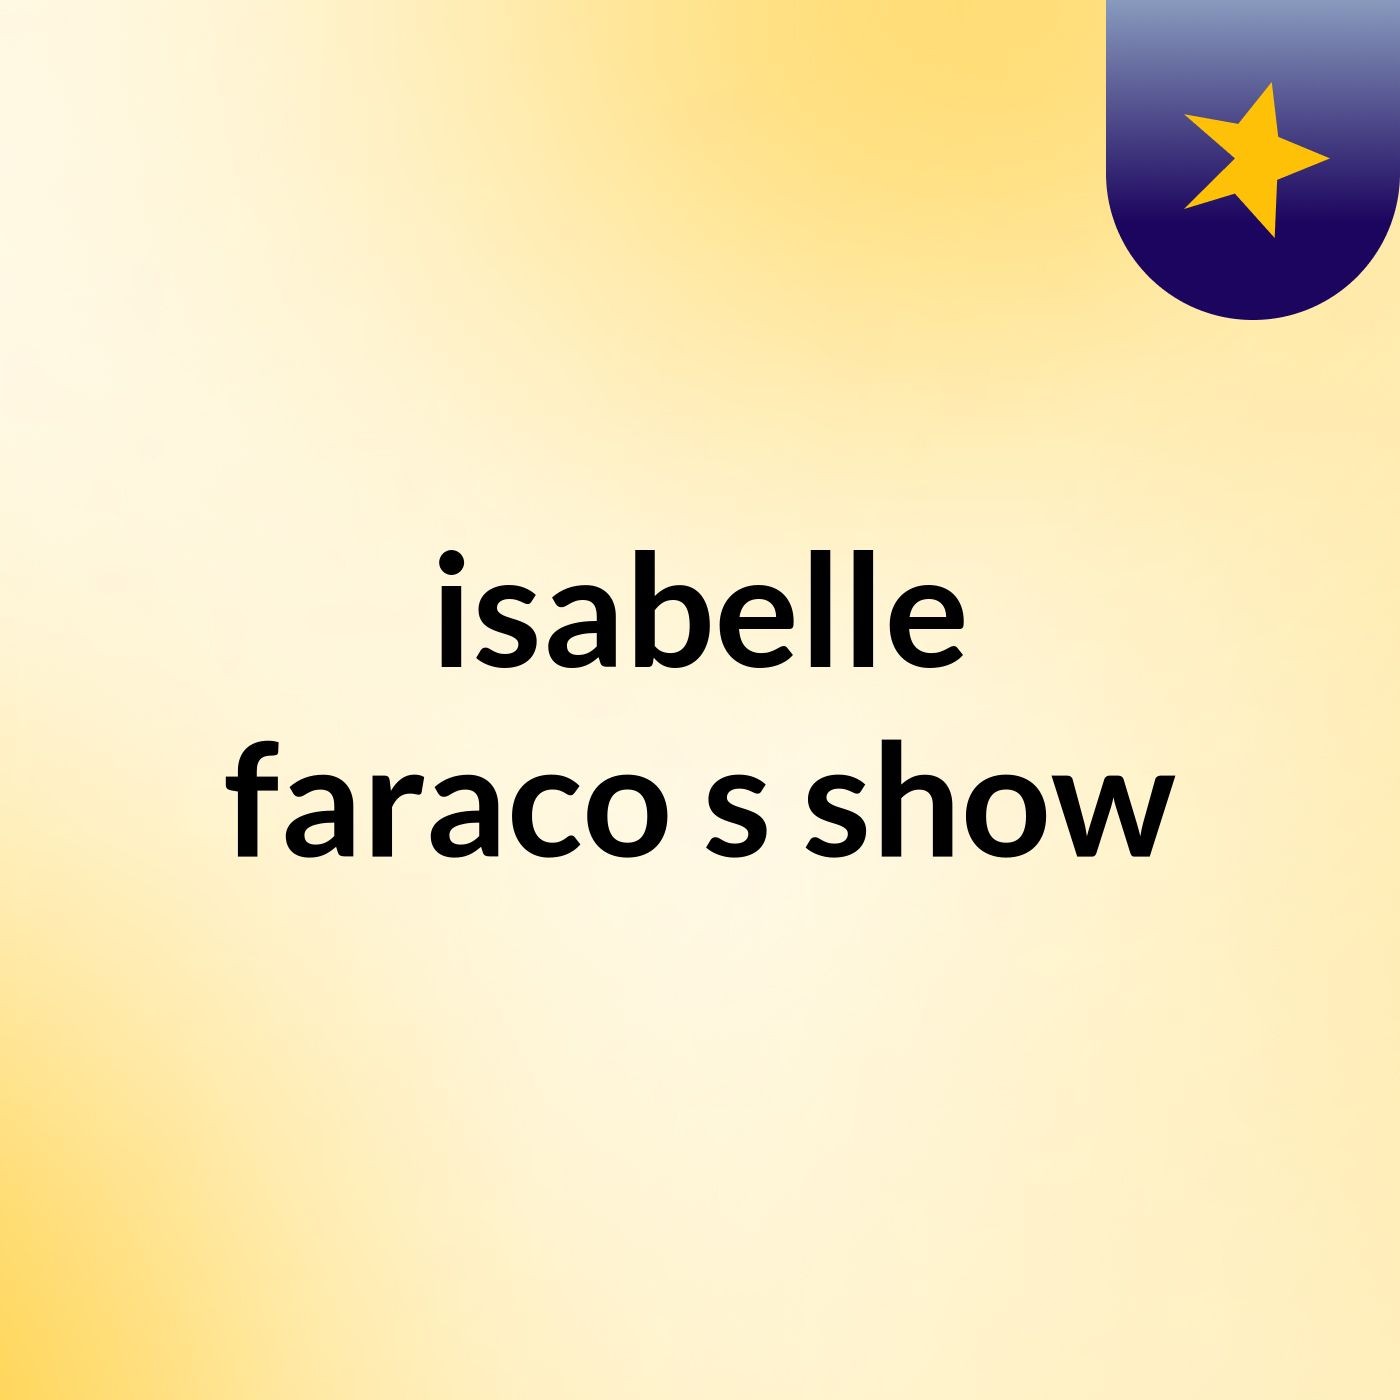 isabelle faraco's show